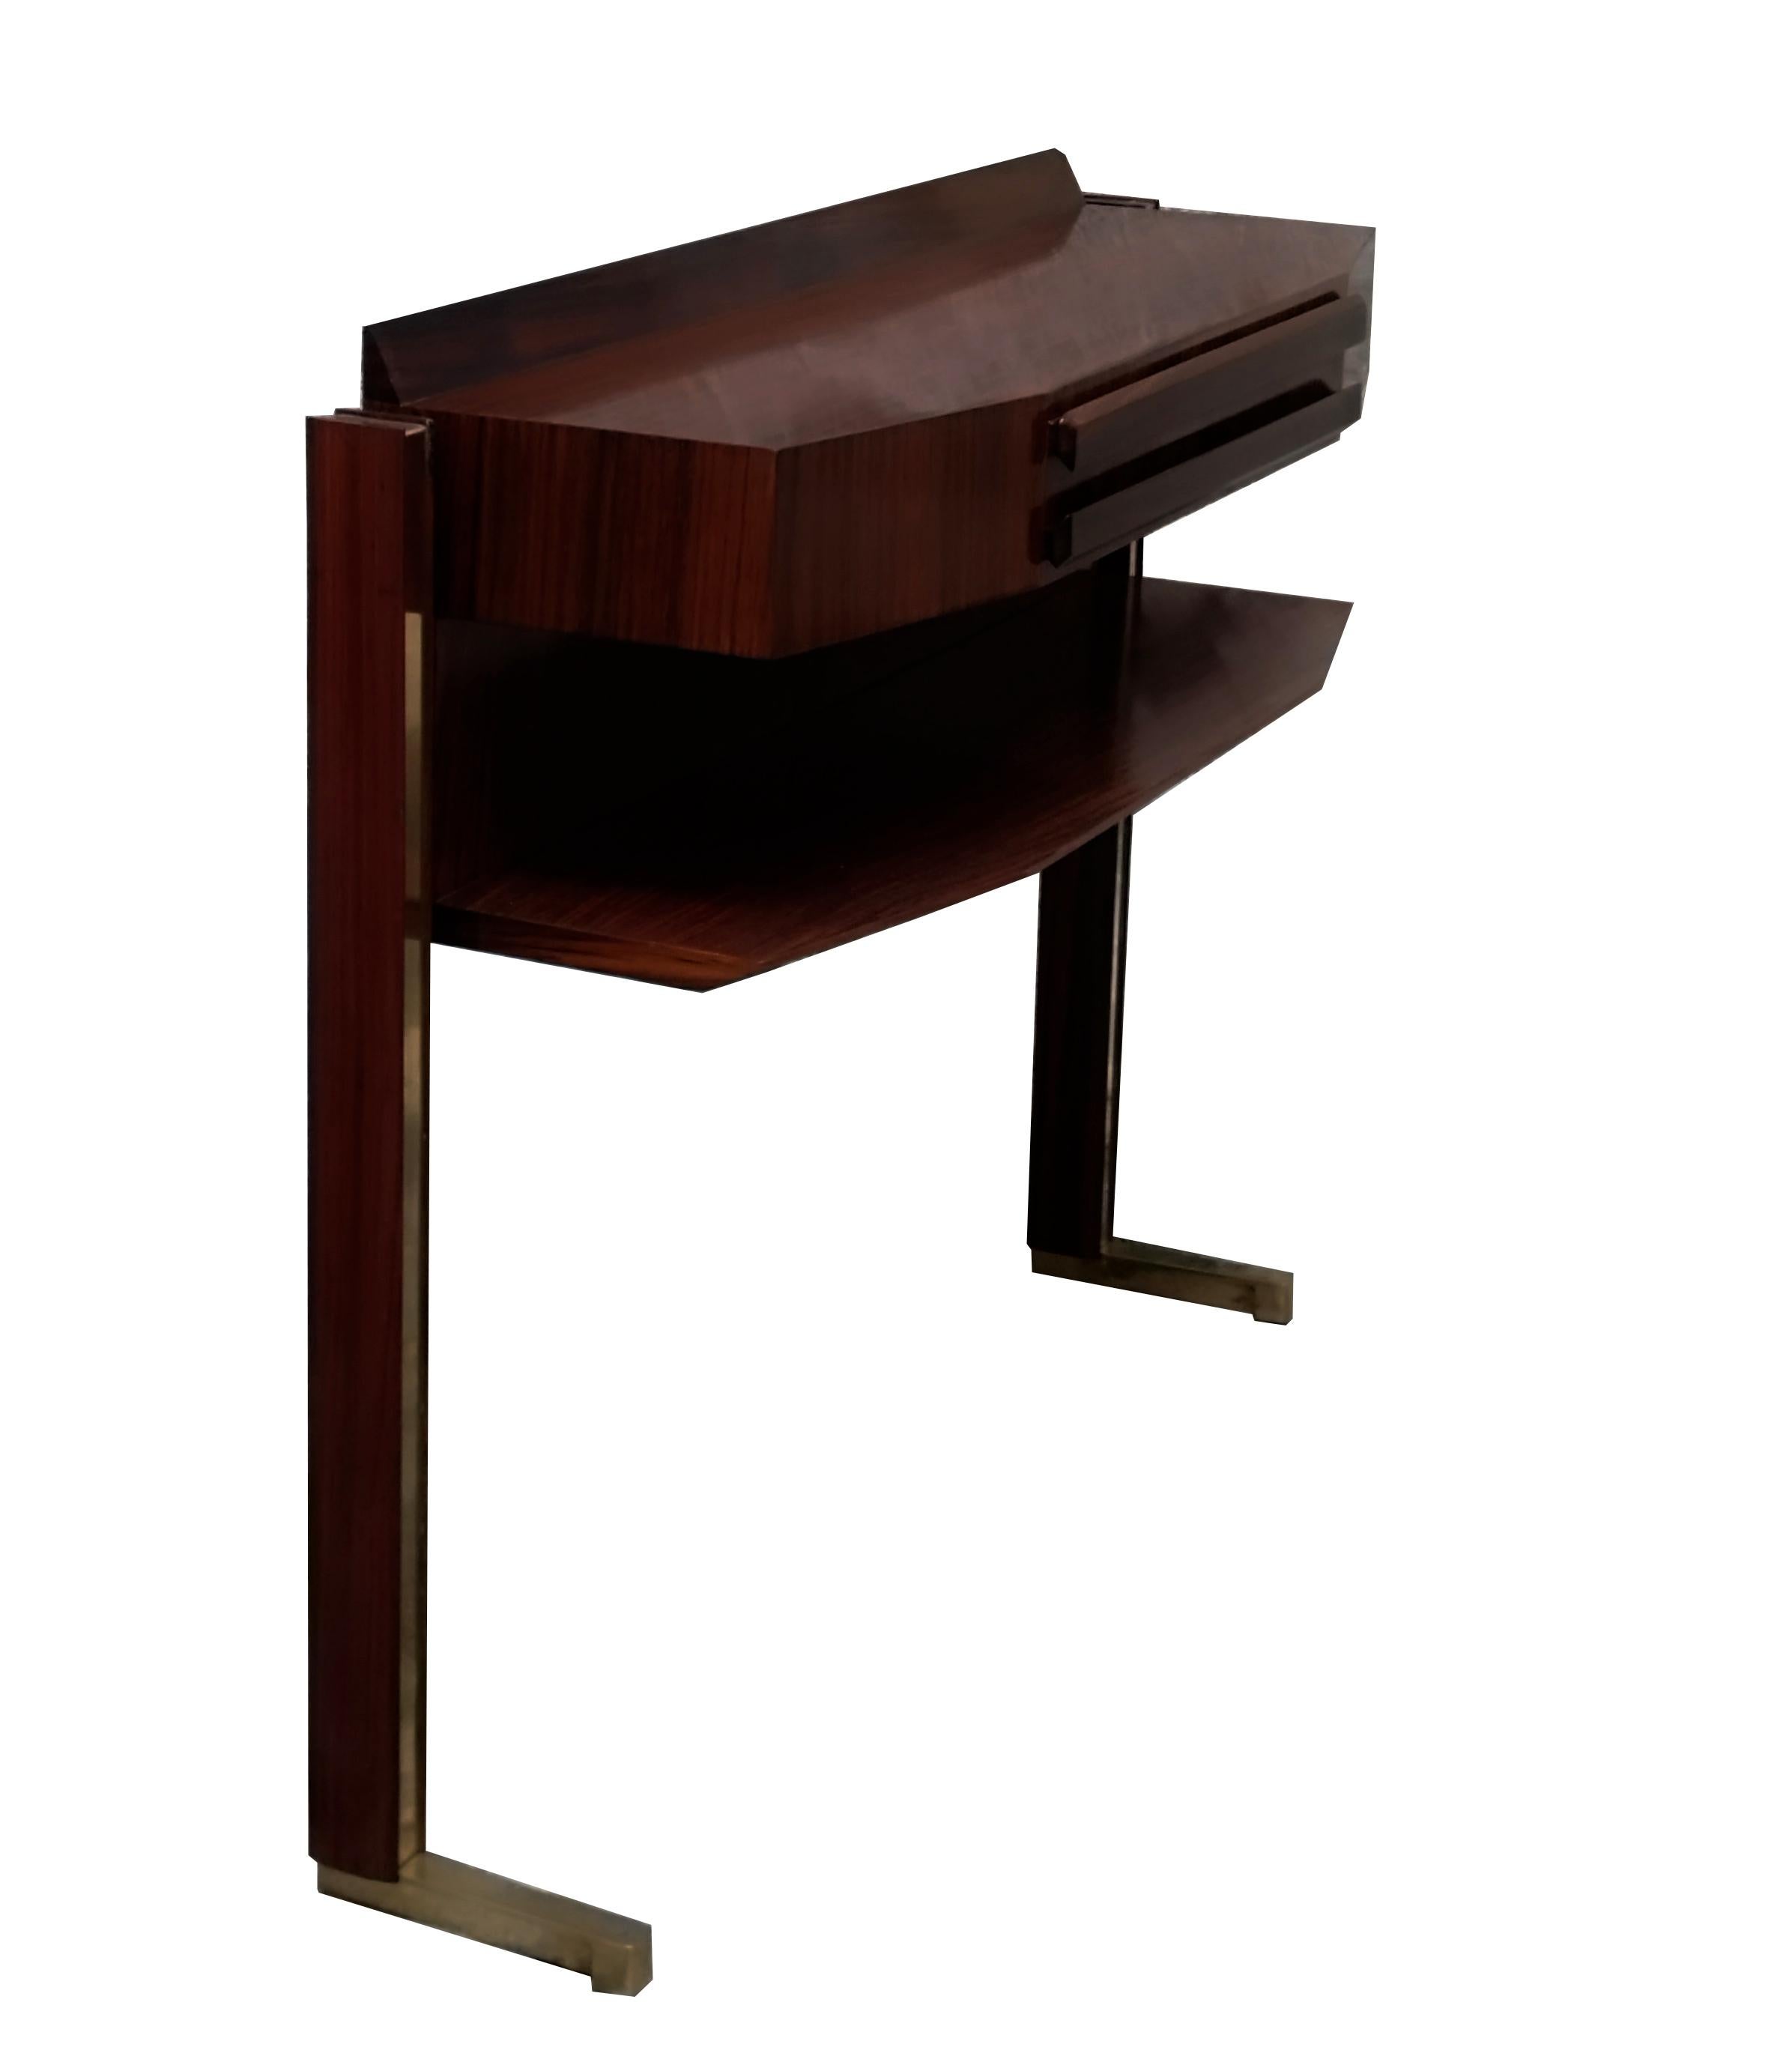 National walnut console table with one drawer and double-T base with elegant brass border. Excellent condition.